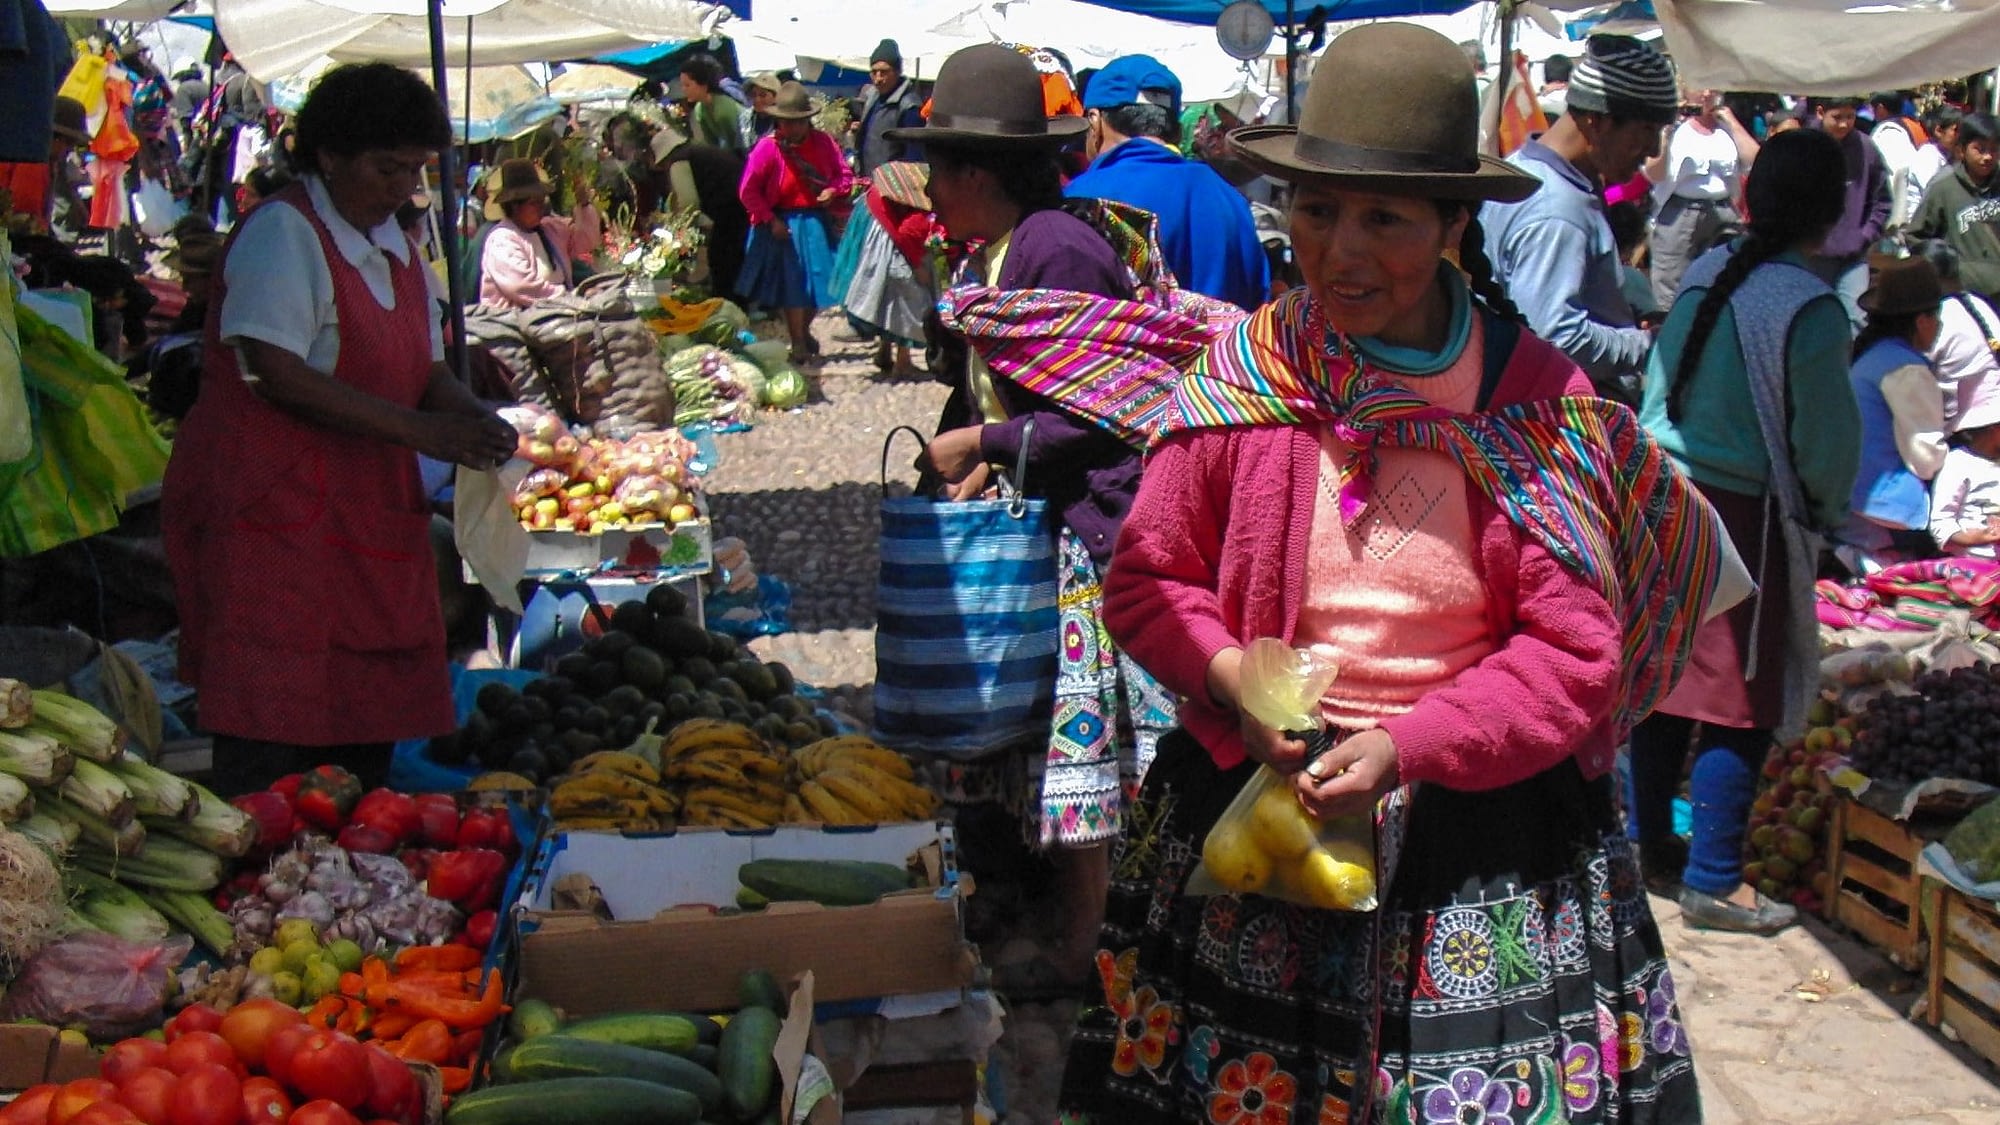 Image: Woman in Peru buying food at a market